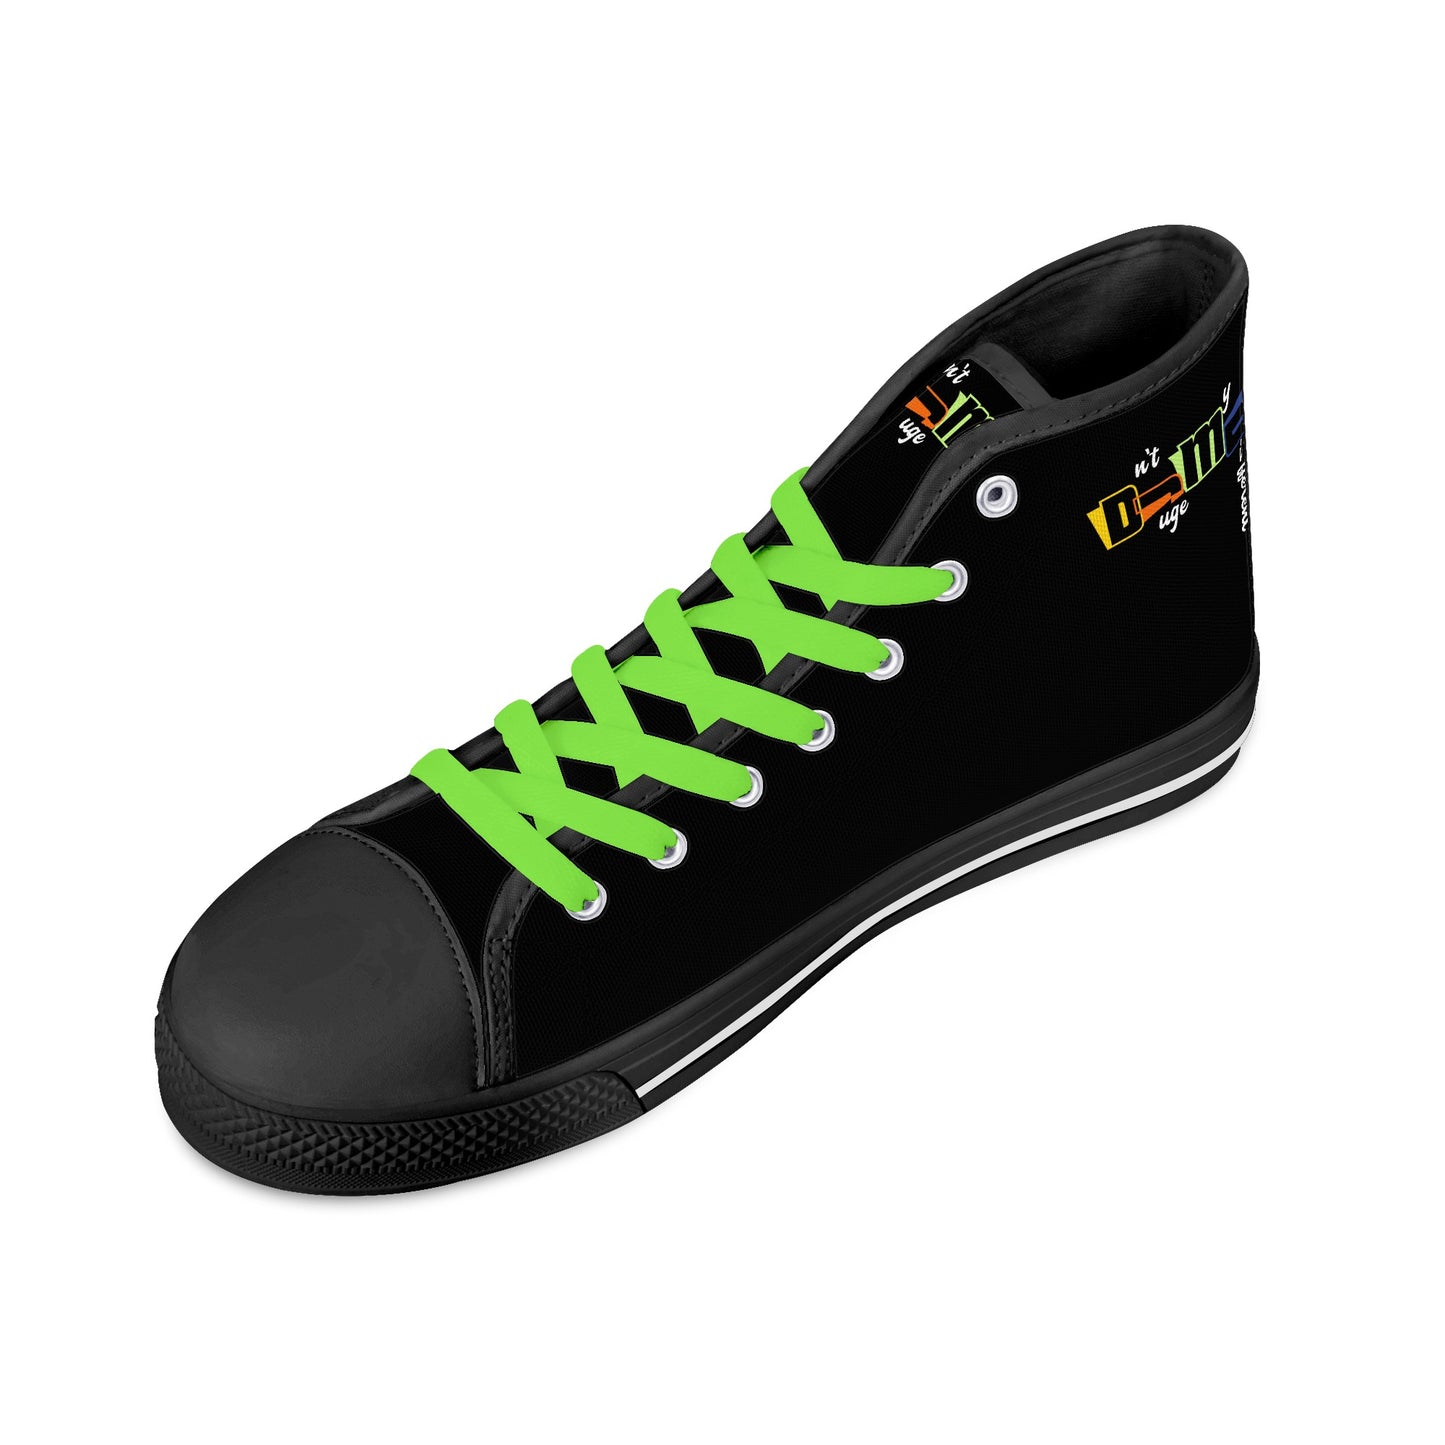 DJMD Womens High Top Canvas Shoes - Customized Tongue